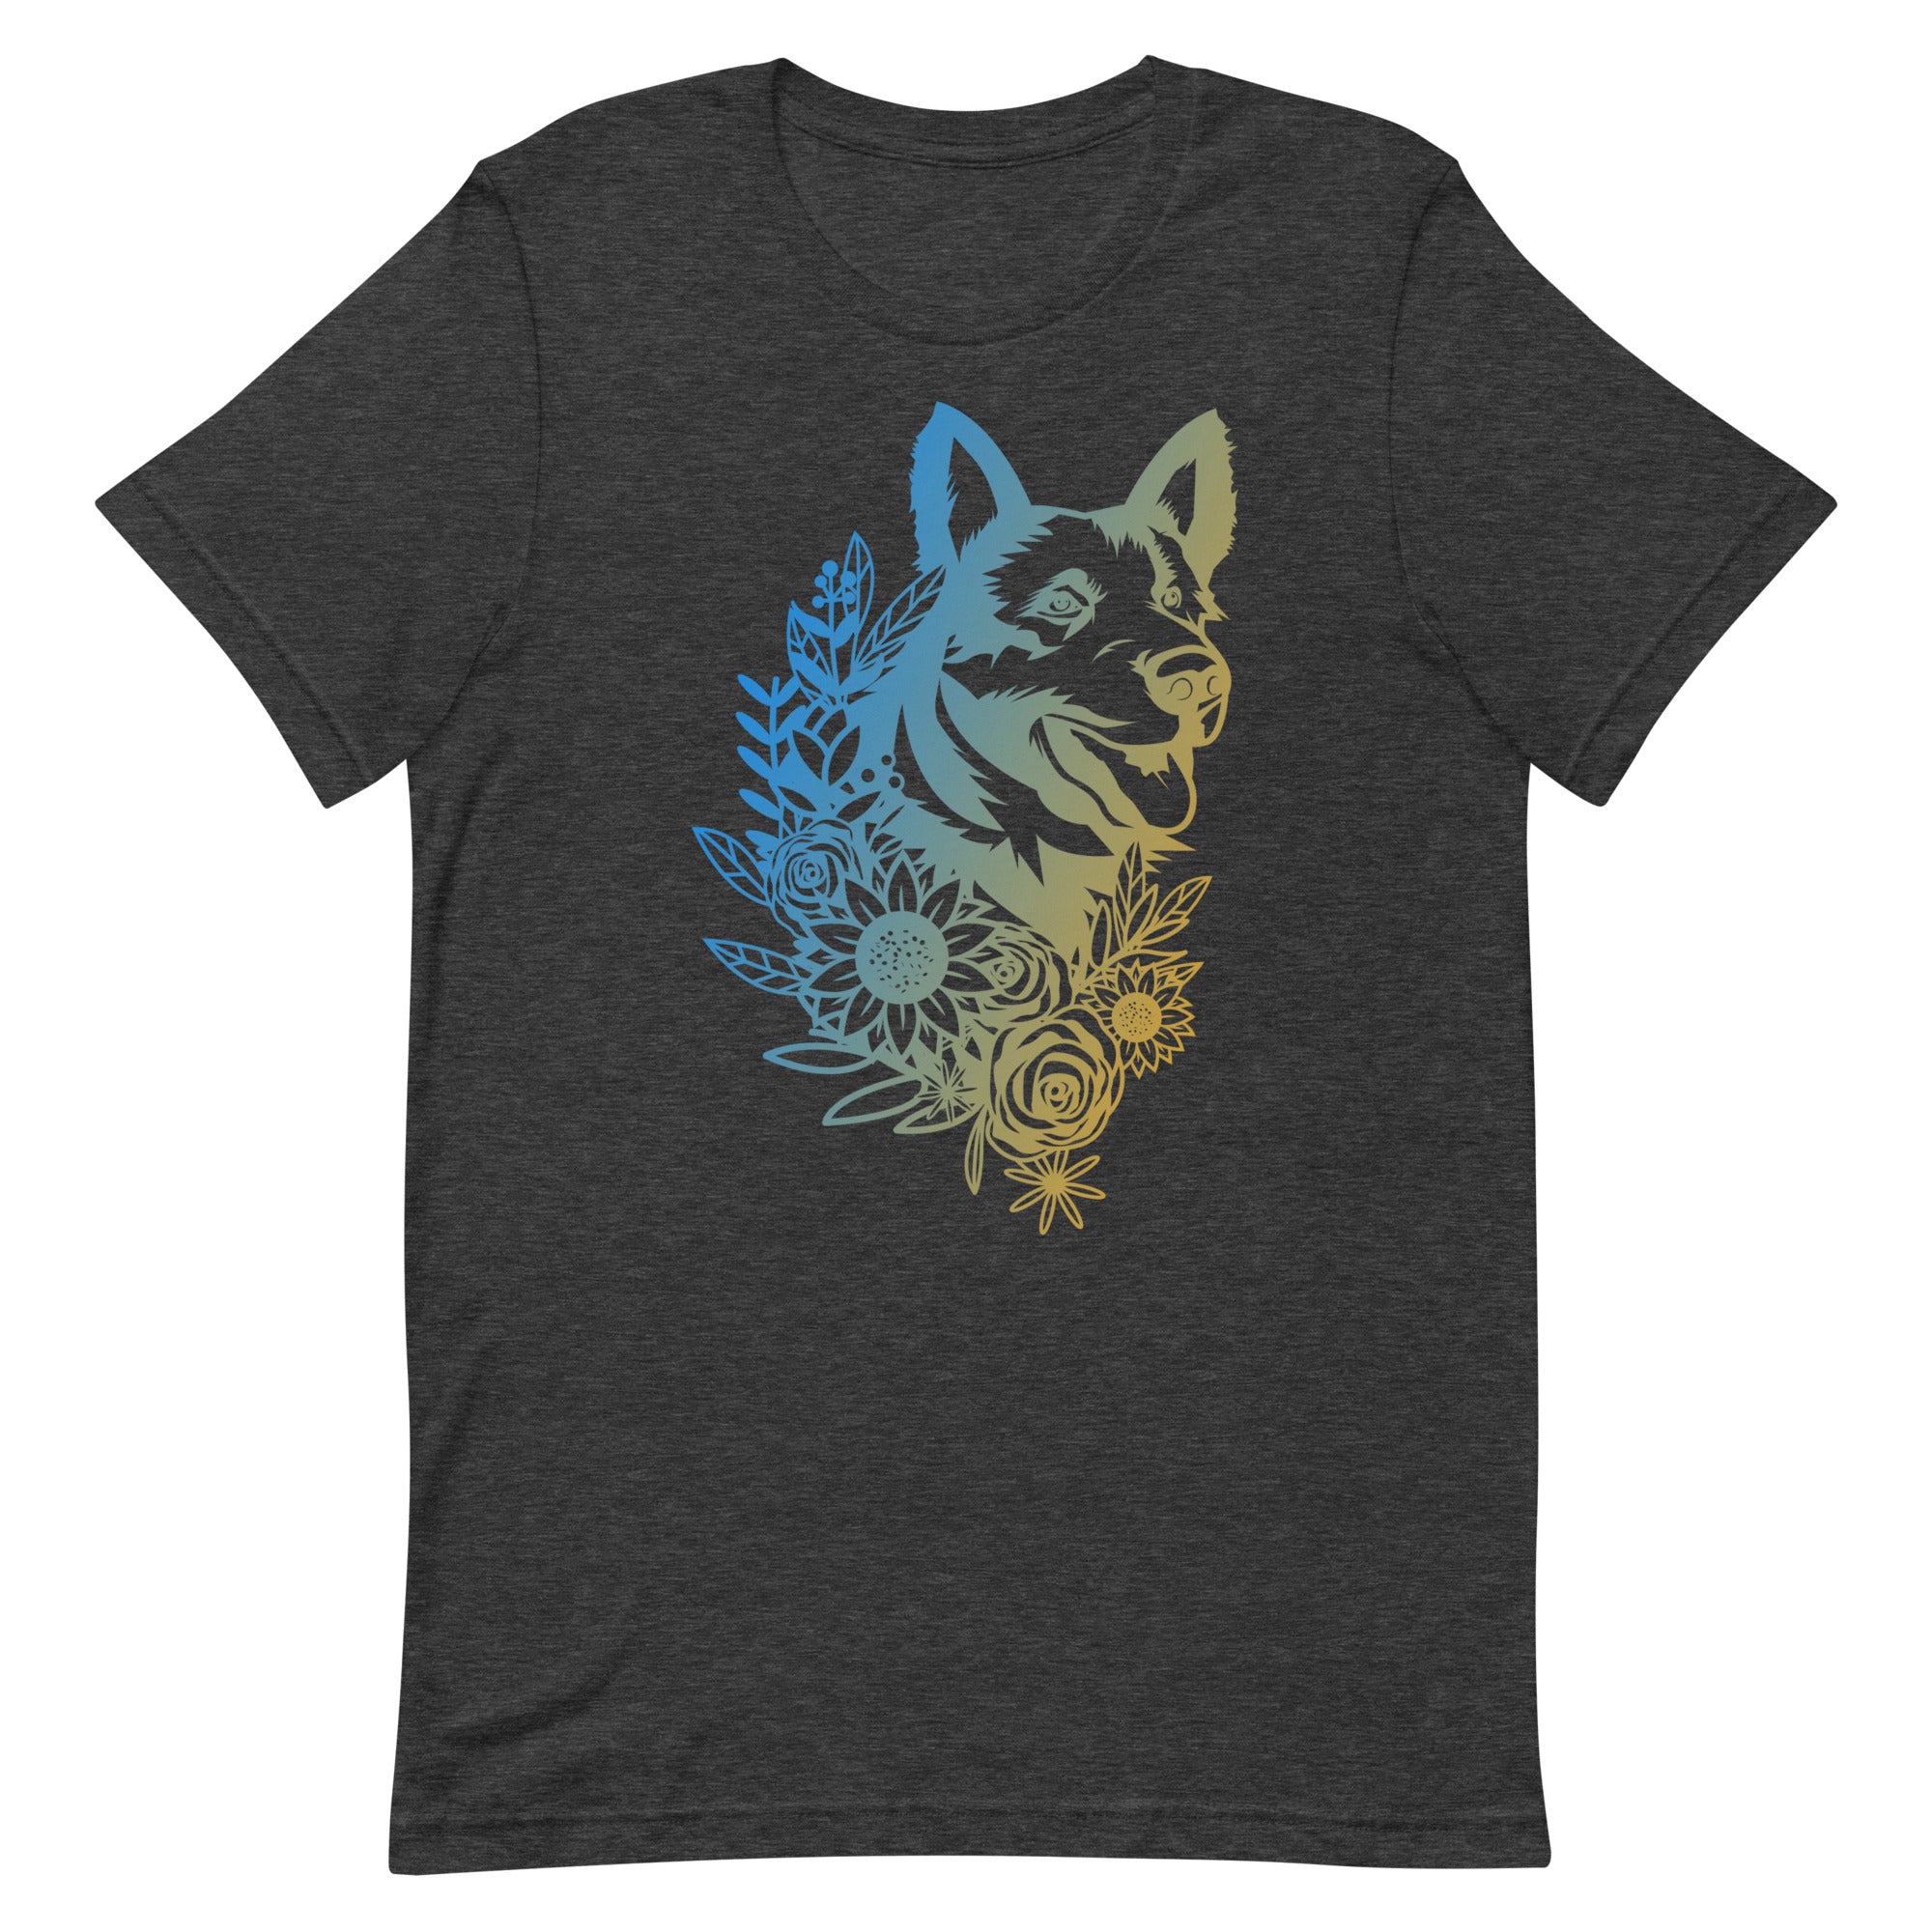 Dog In Flowers T-Shirt